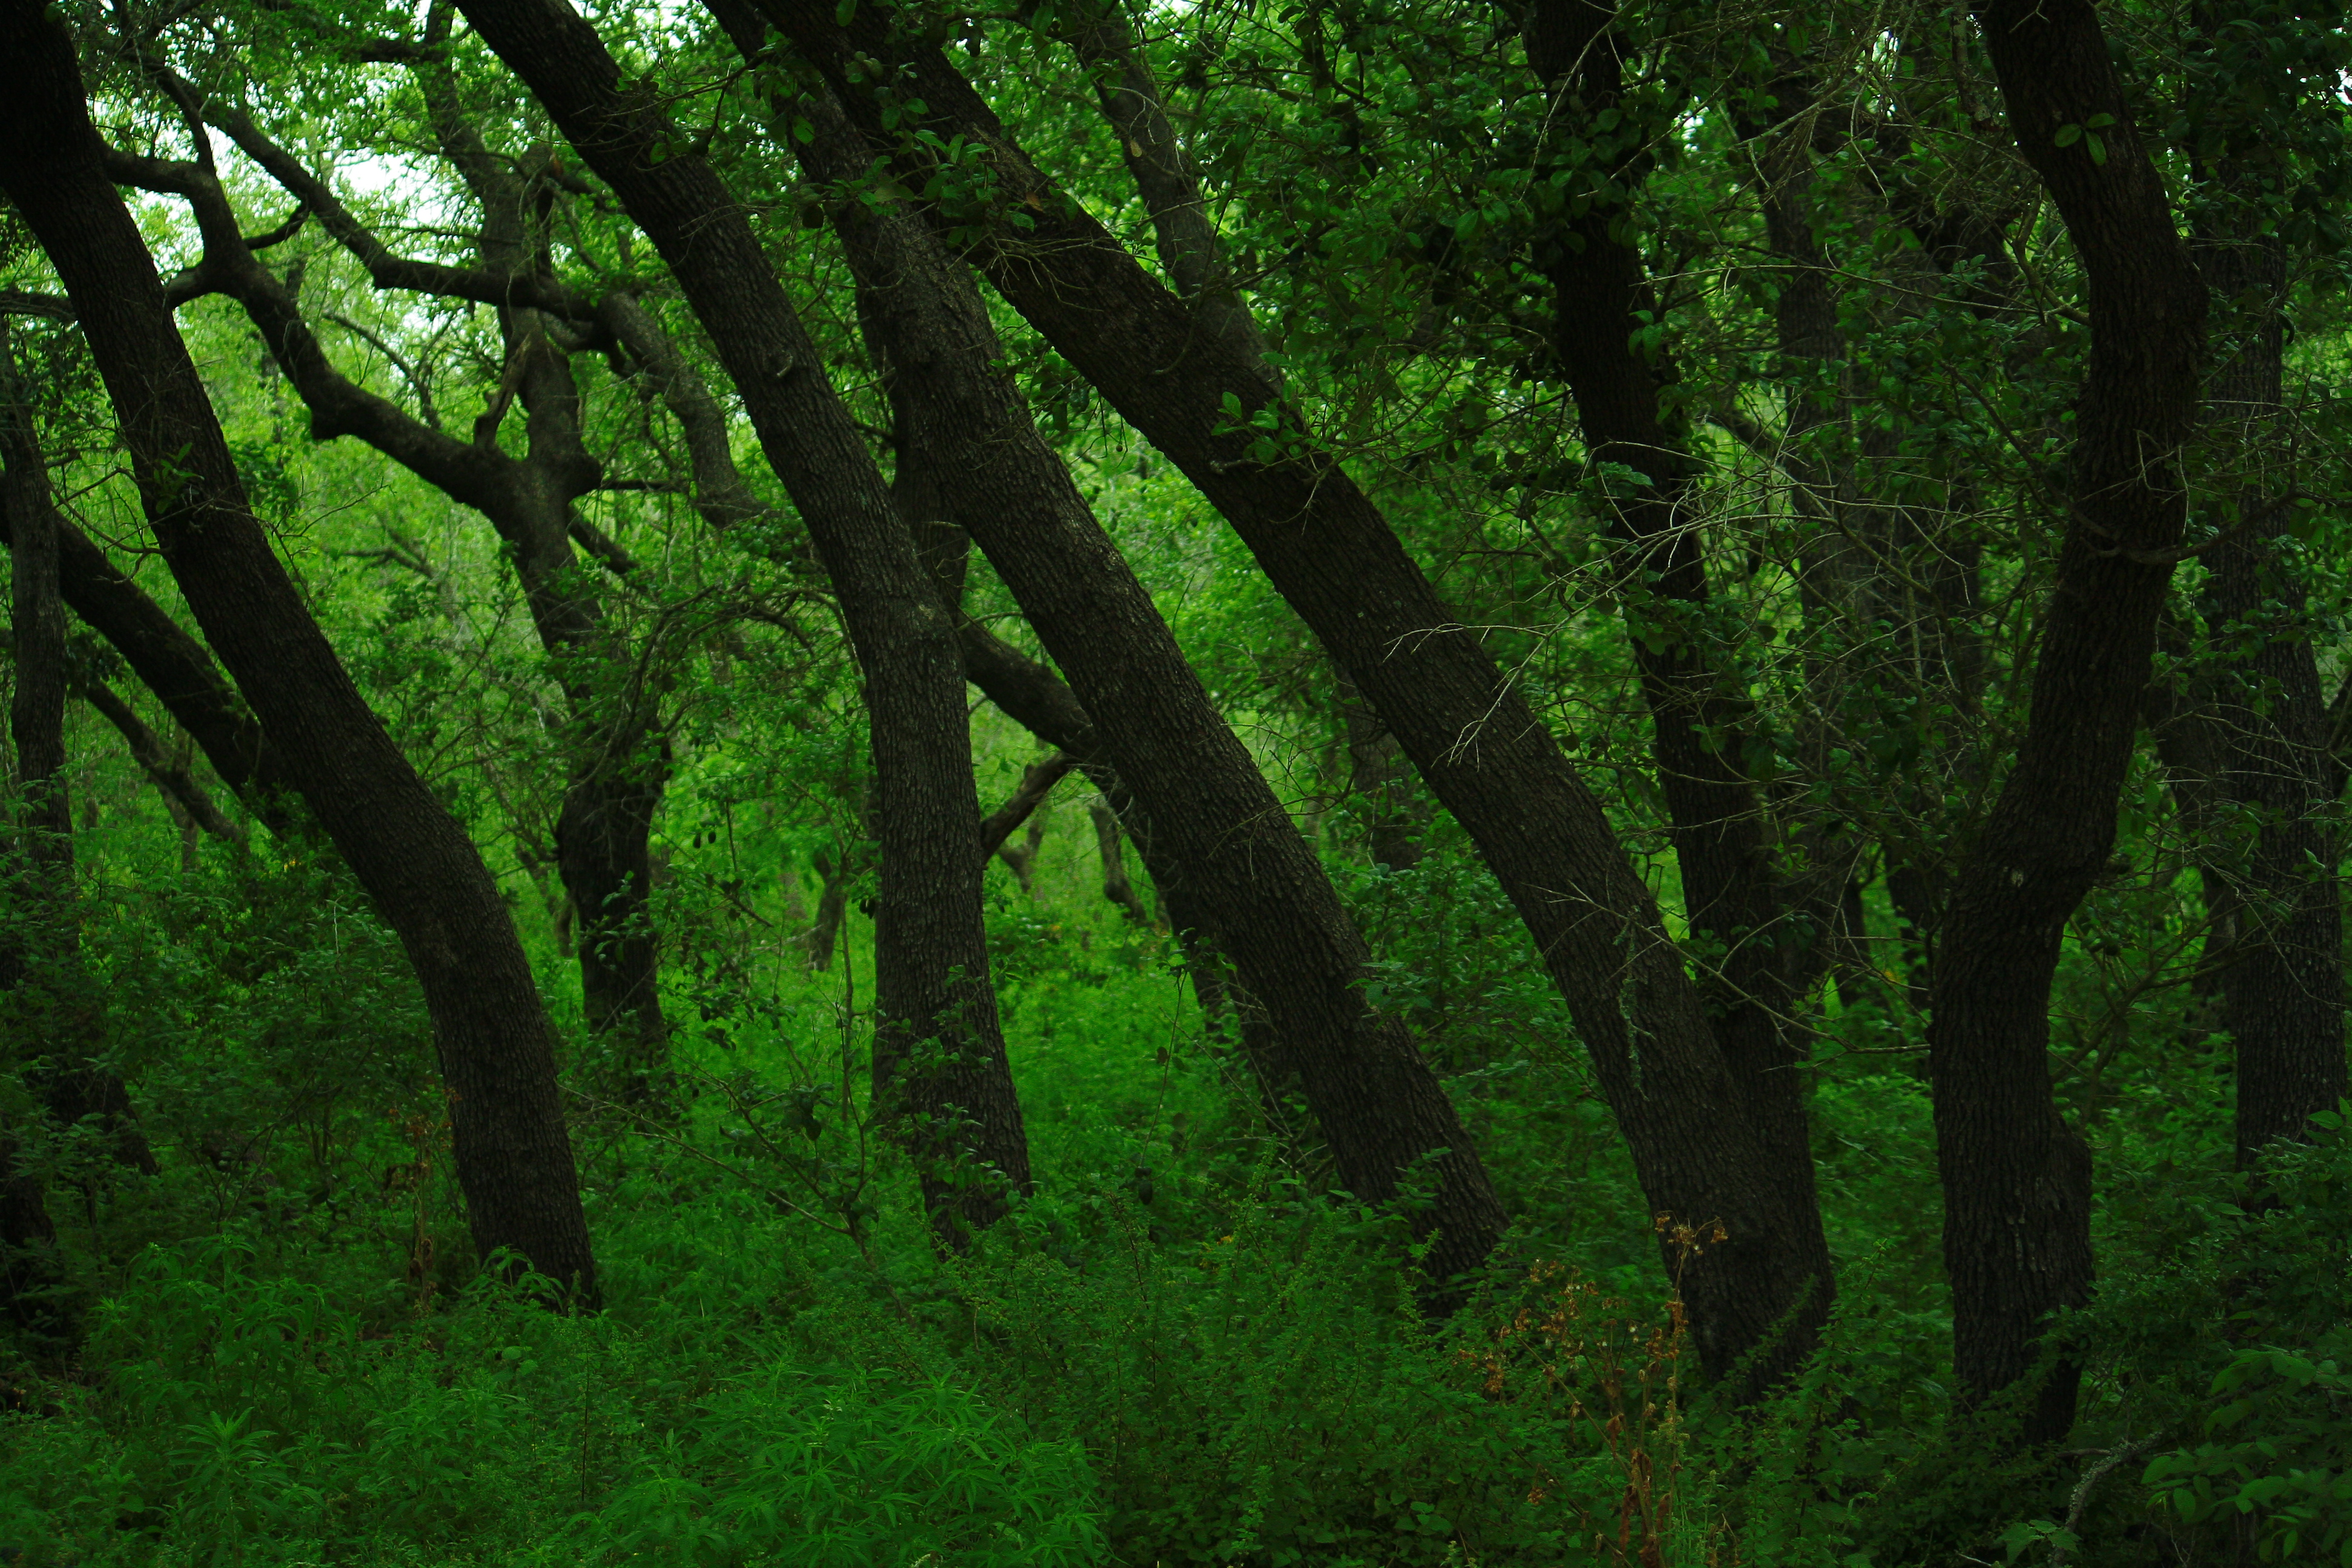 Live Oak Forest Near Hill Country Could Soon Be Sacrificed to Frack